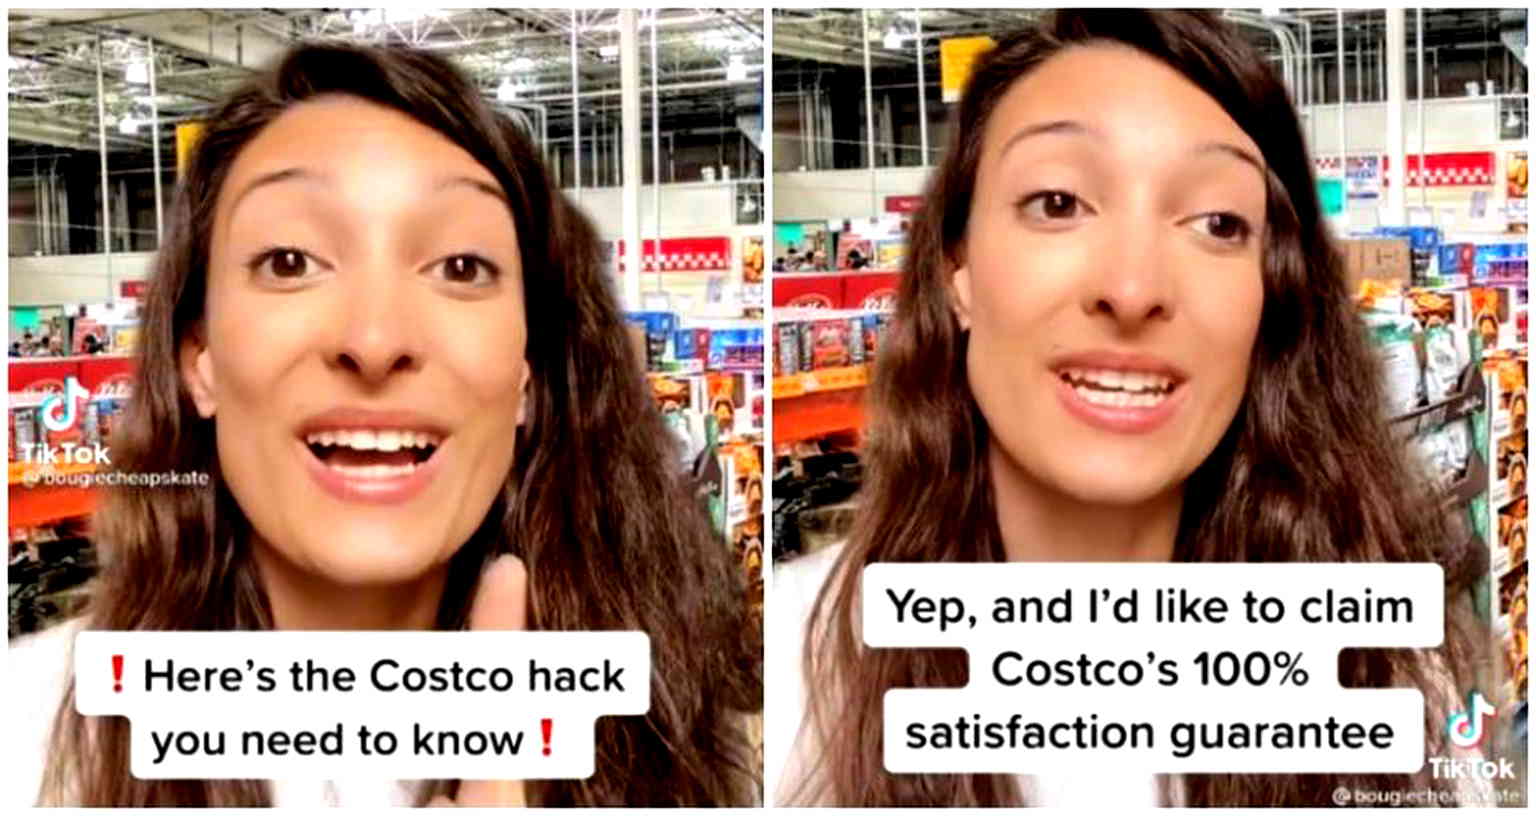 Budget guru TikToker shares Costco ‘hack’ that allows customers to return years-old purchases